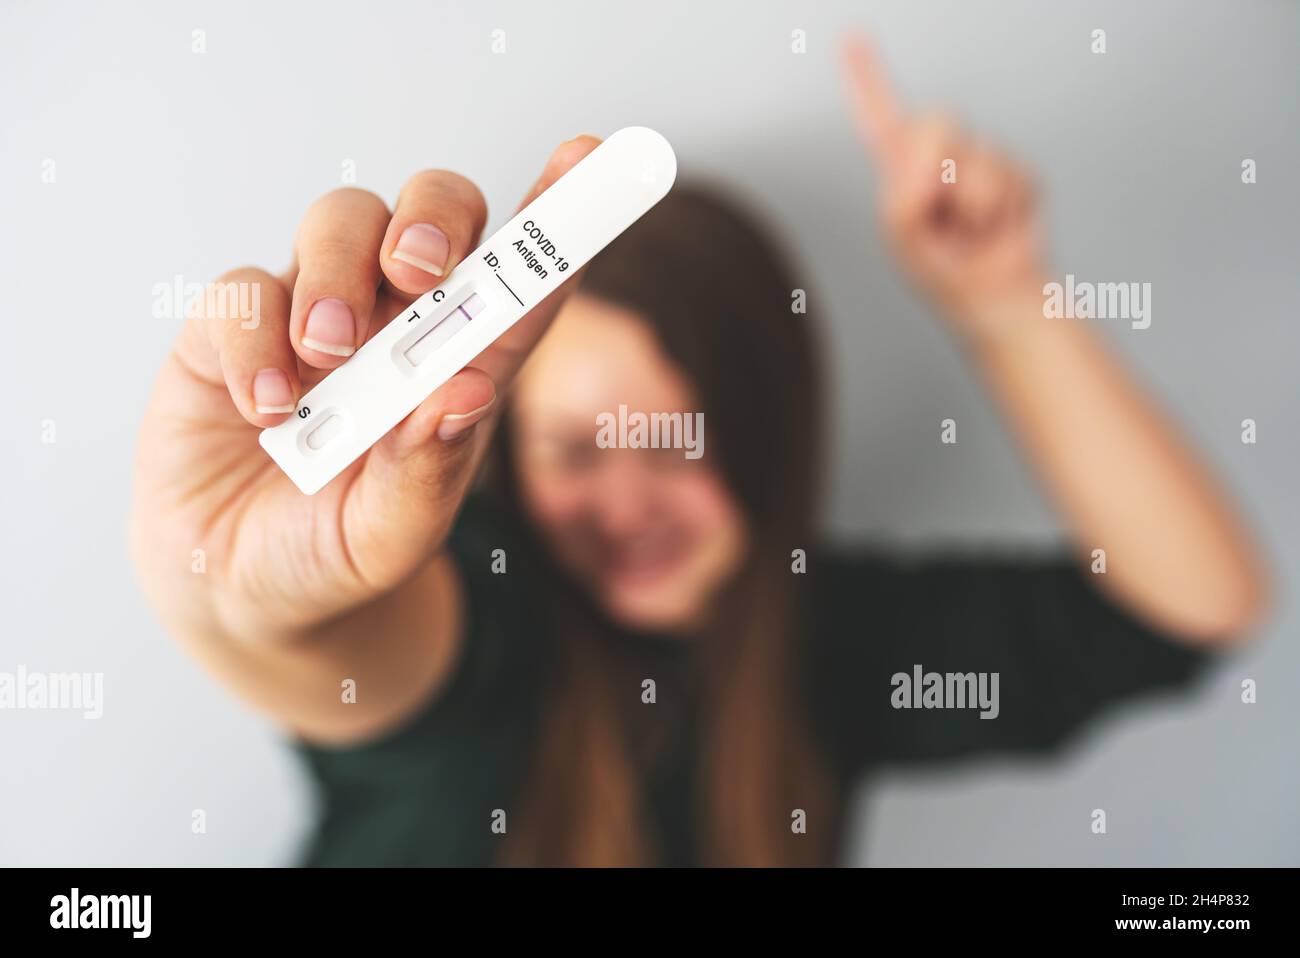 Negative rapid antigen COVID-19 test in hand of unrecognizable blurred person. Happy woman shows her test result. Travel during the coronavirus pandemic, avoid quarantine, new normal concept. Stock Photo